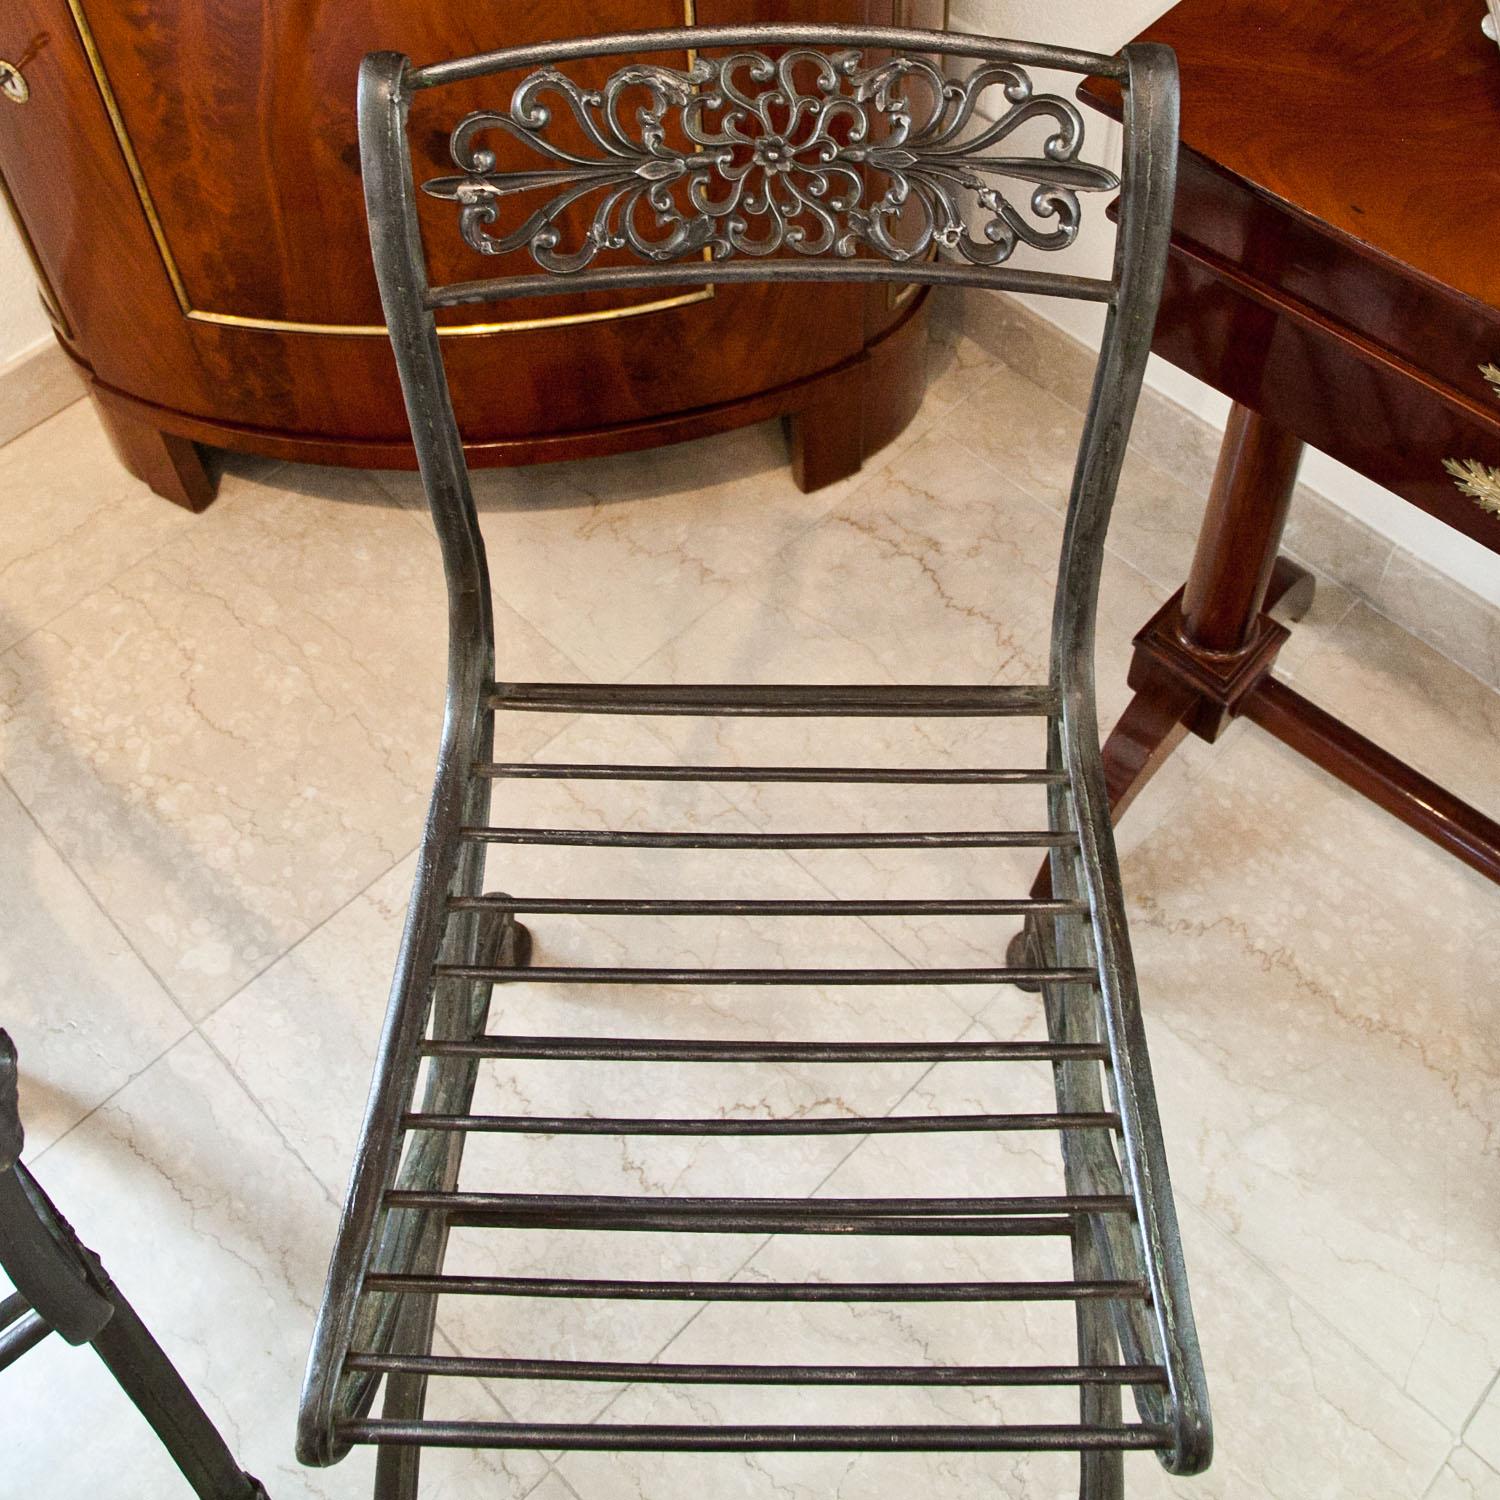 Neoclassical Iron Chair, After a Design by Karl Friedrich Schinkel, Mid-19th Century